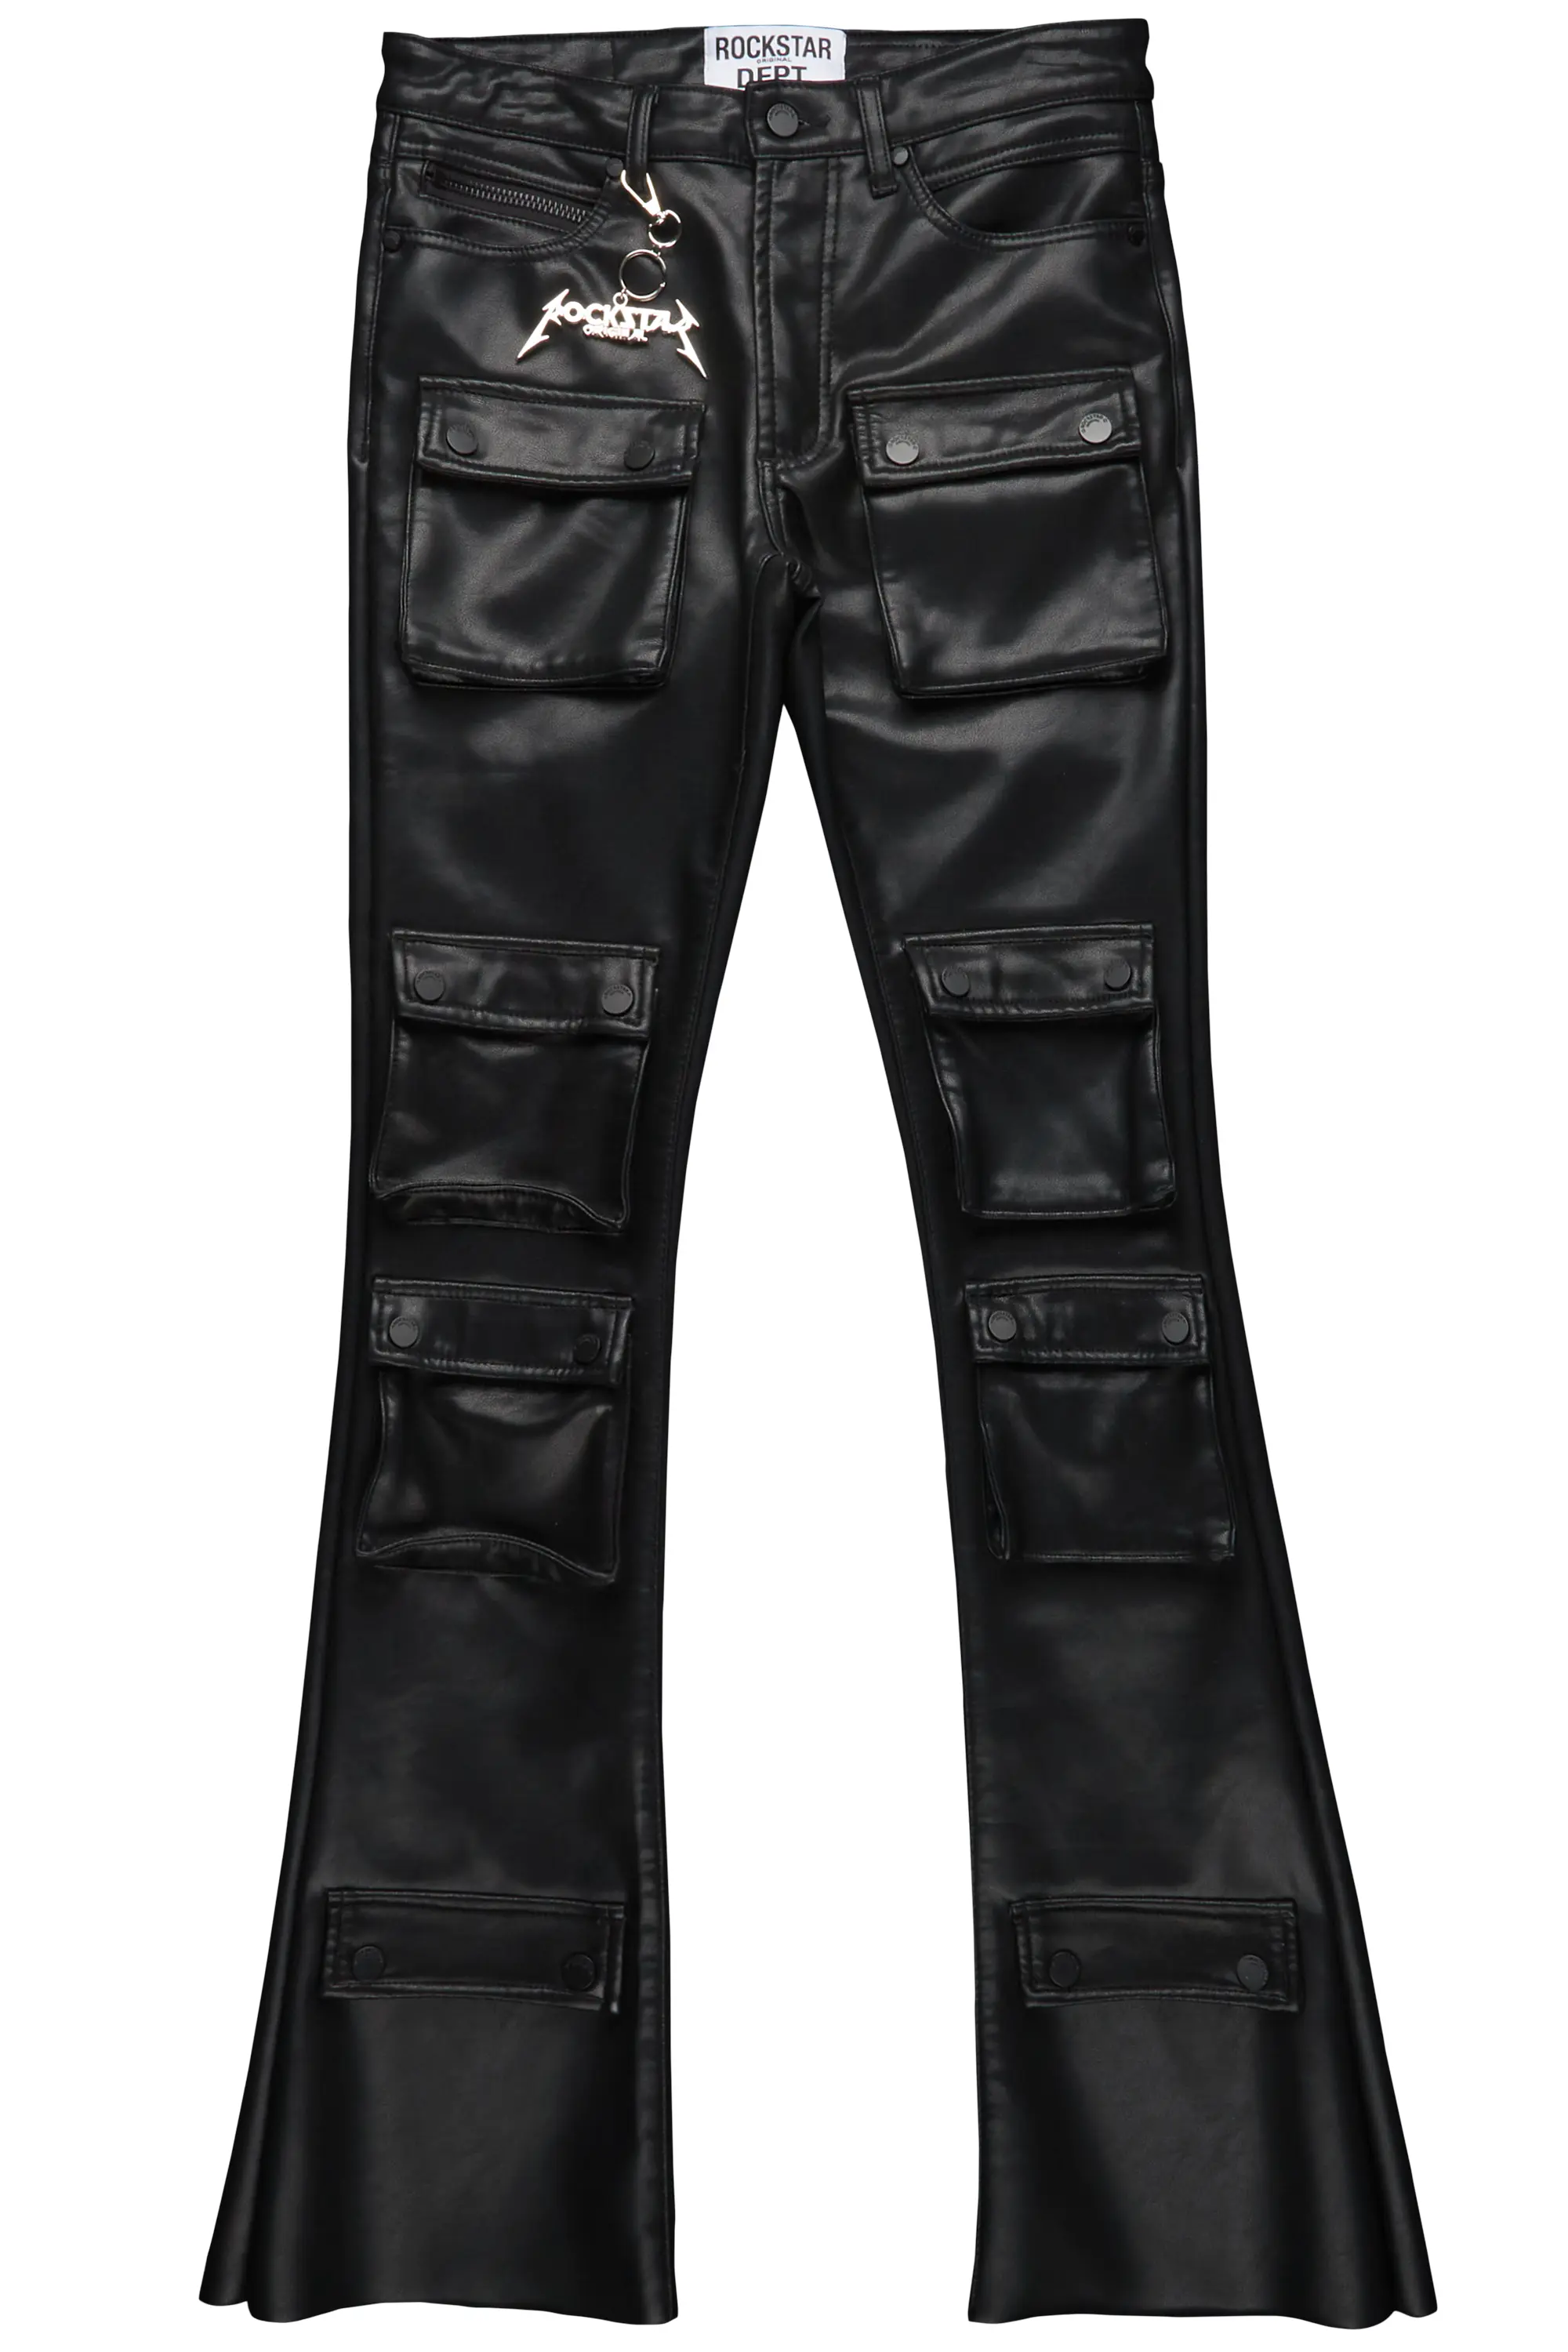 Remi Black Faux Leather Stacked Flare Jean